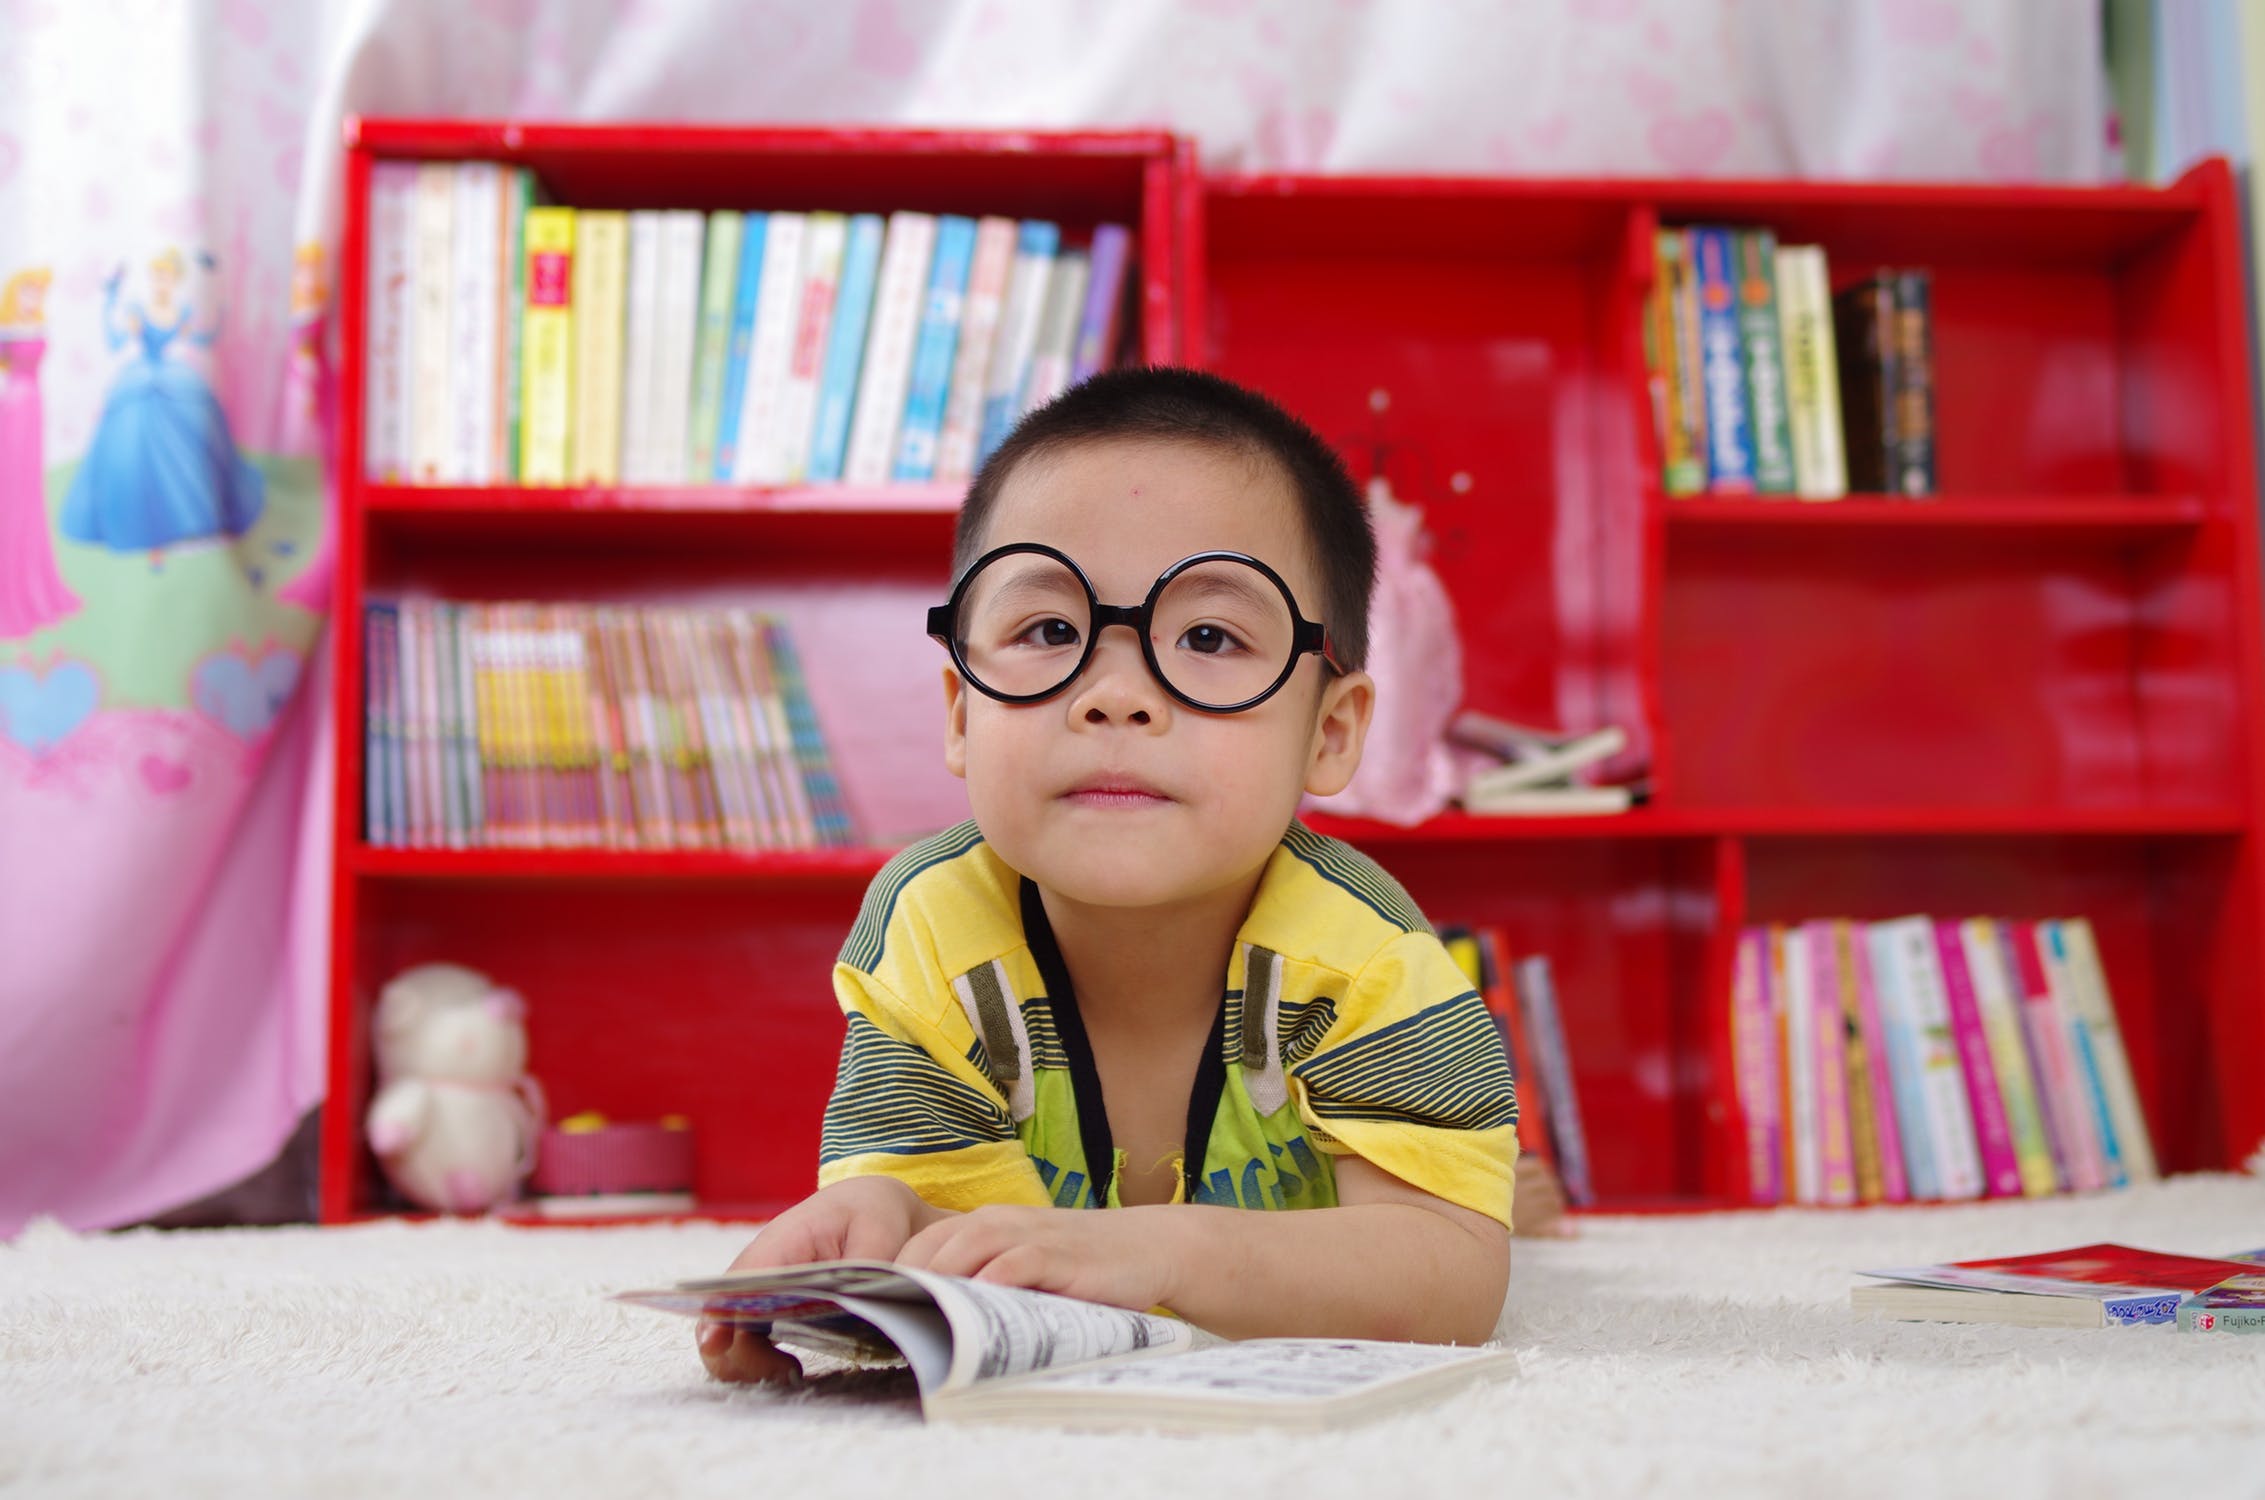 Boy with glasses reading a book.